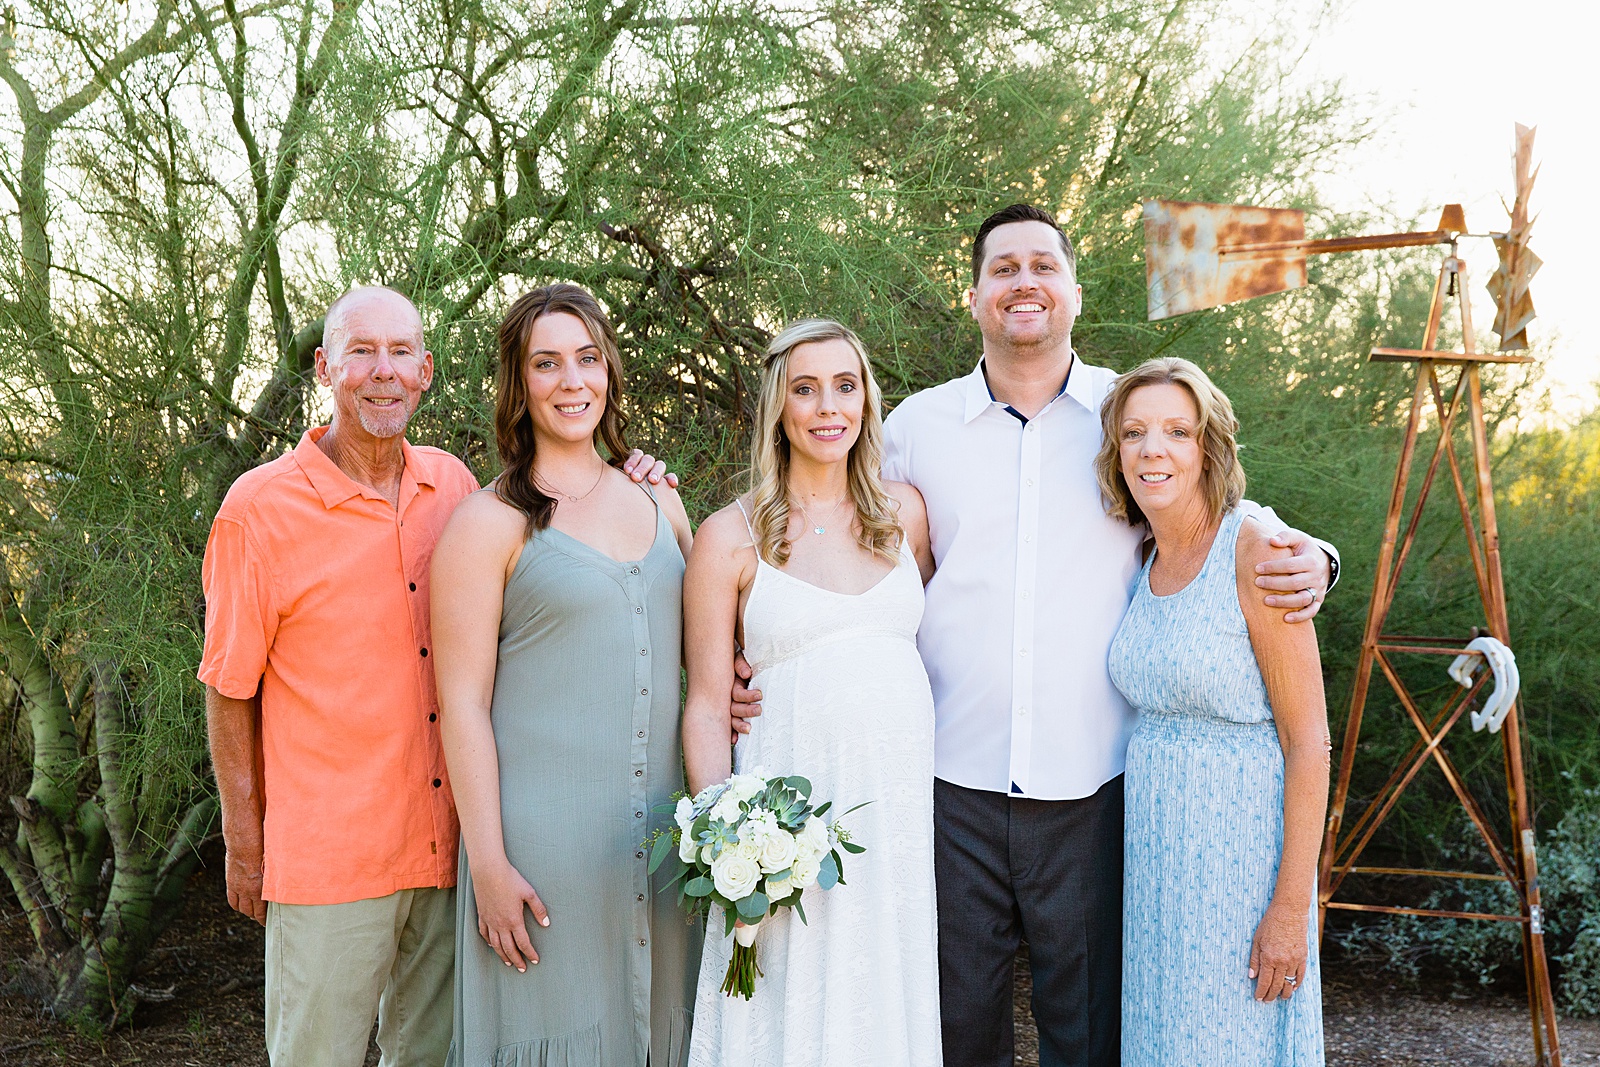 Bride and groom pose with their family members during their desert backyard elopement by Scottsdale wedding photographer PMA Photography.